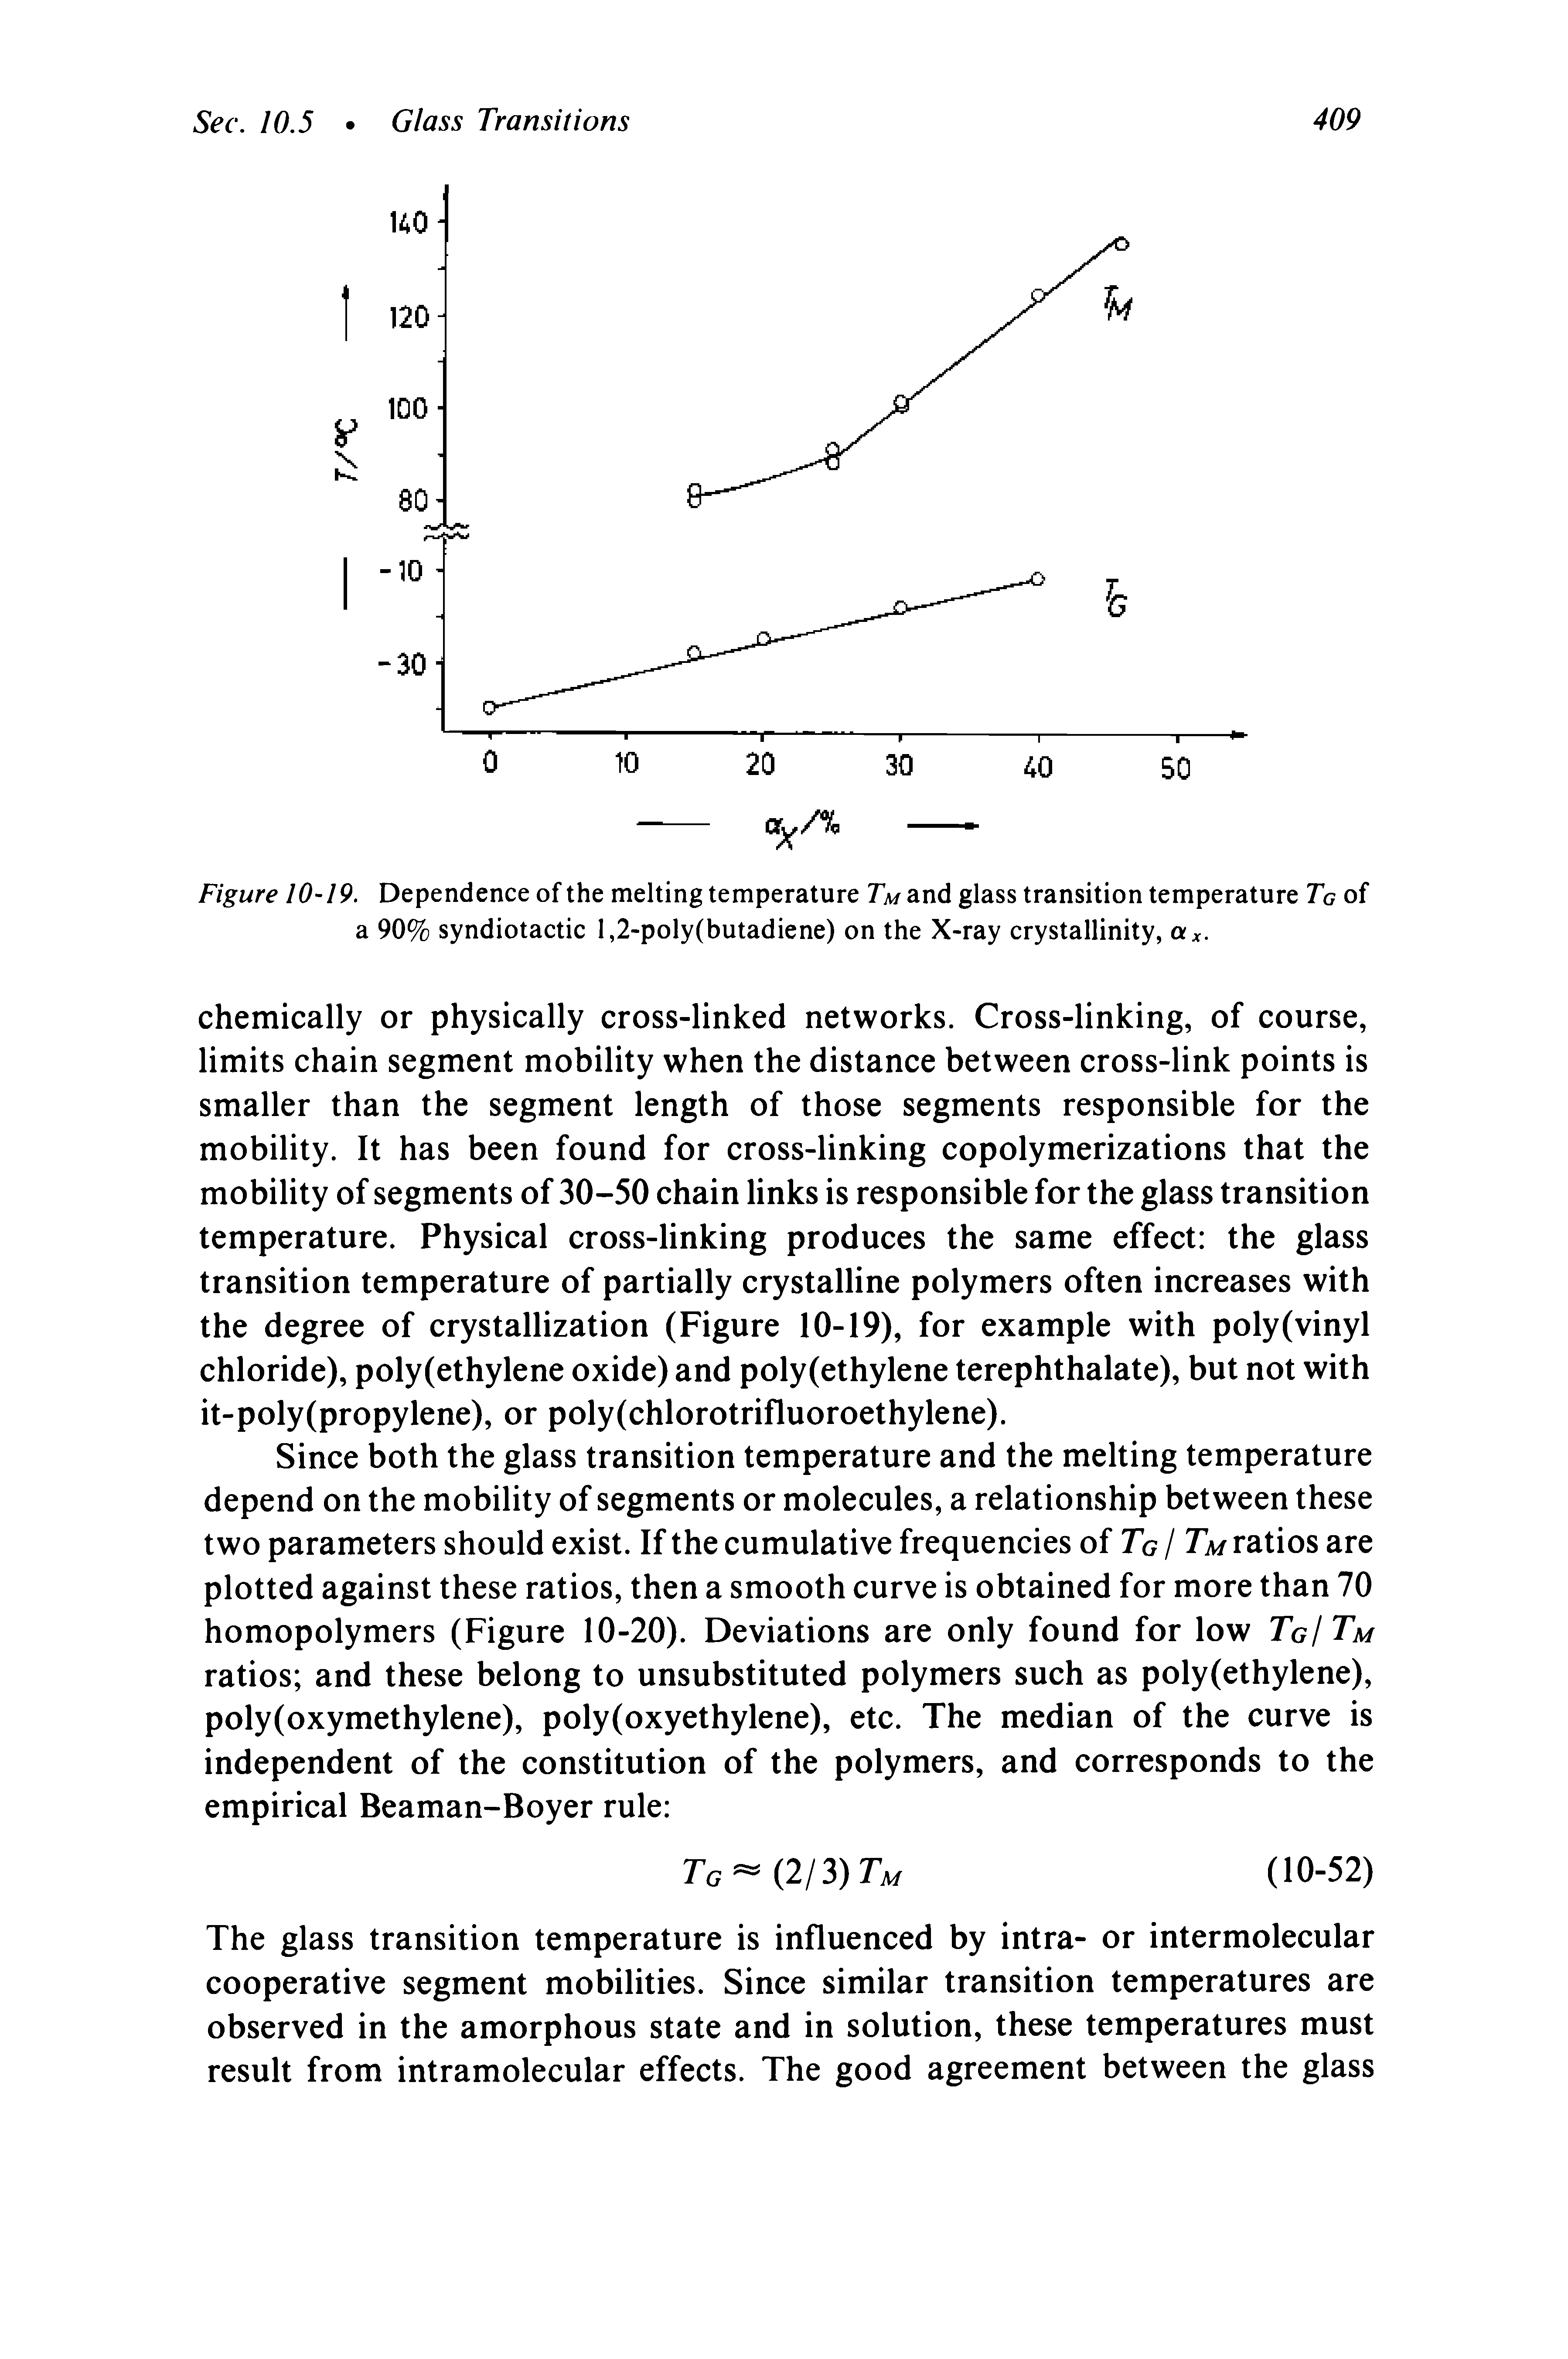 Figure 10-19. Dependence of the melting temperature Tm and glass transition temperature Tg of a 90% syndiotactic l,2-poly(butadiene) on the X-ray crystallinity, olx.